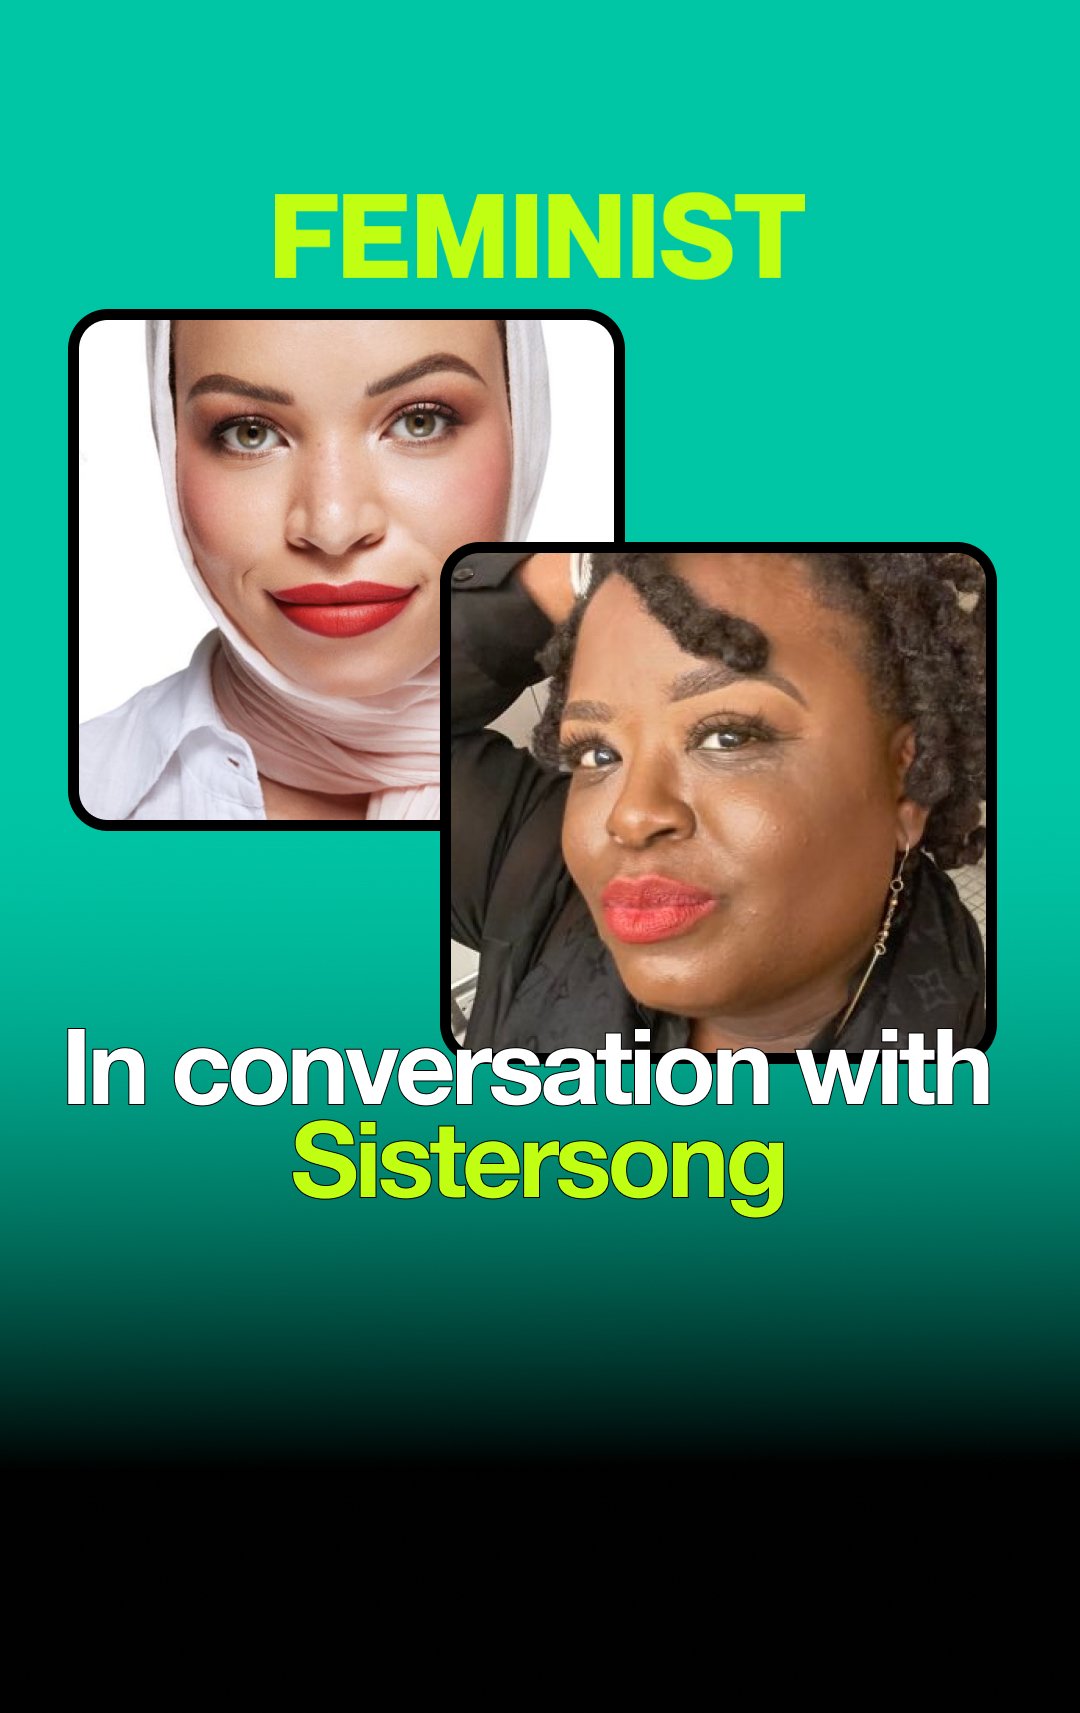 Sistersong x FEMINIST